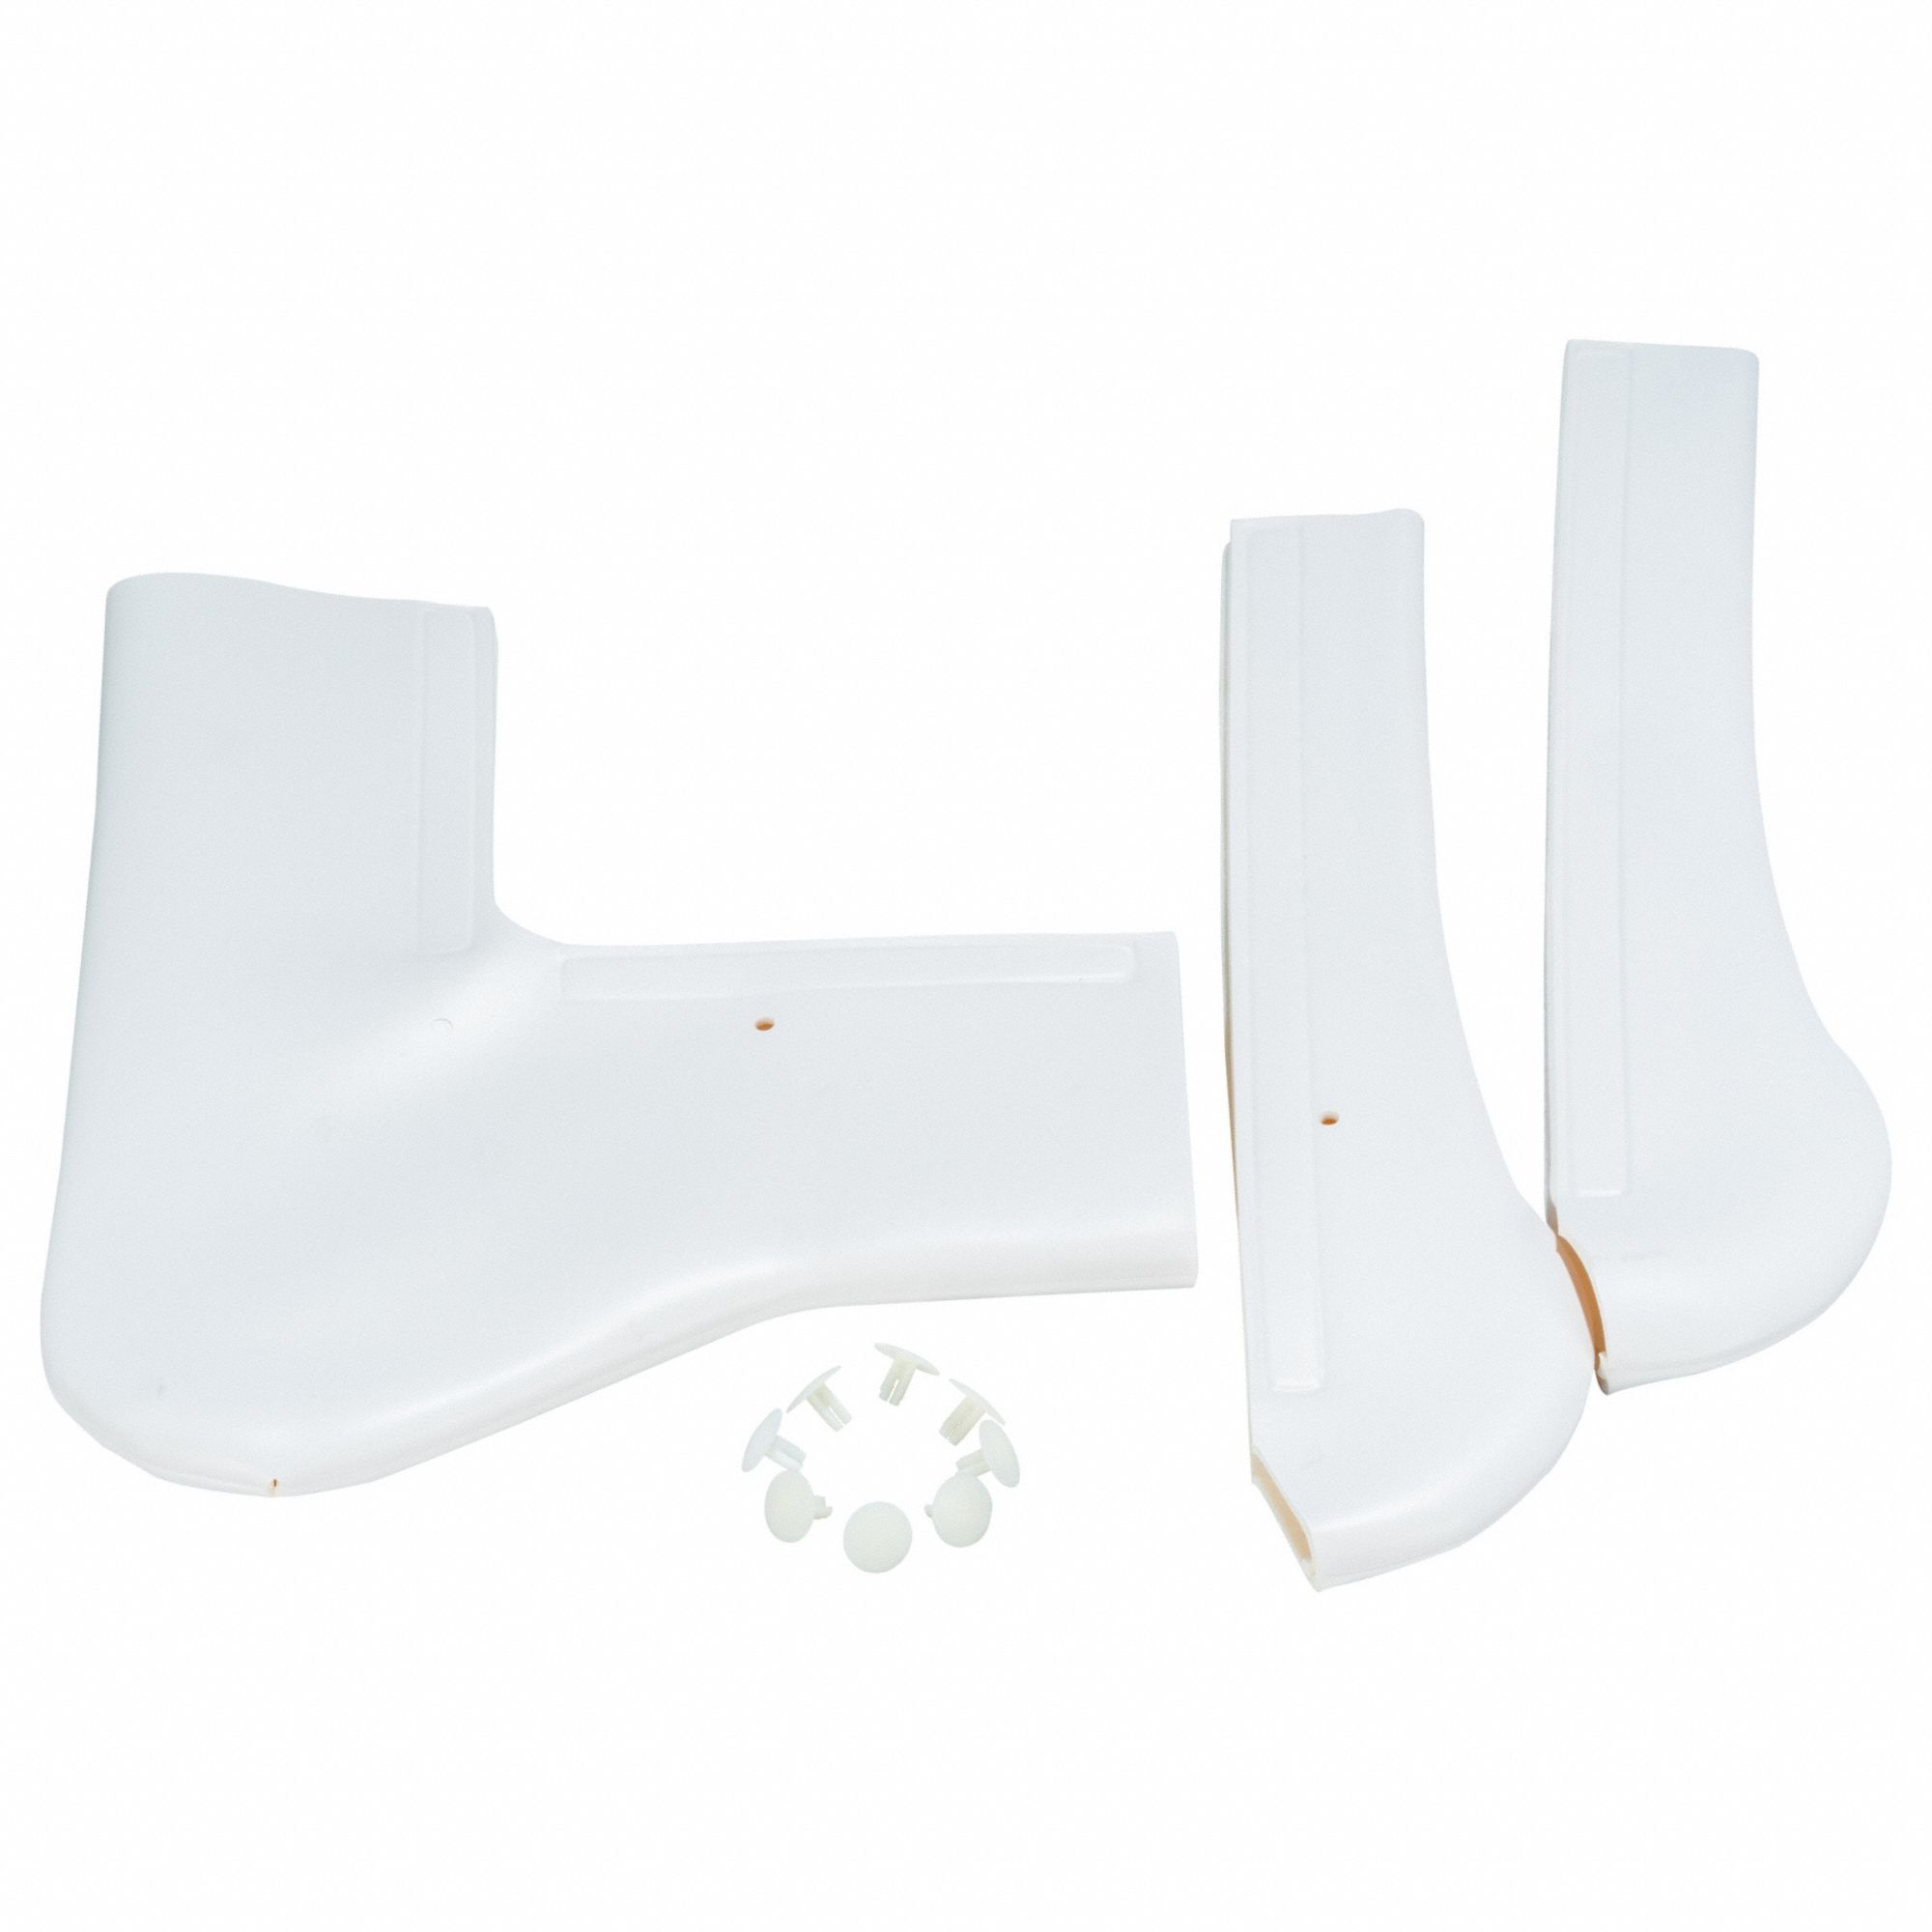 Undersink Pipe Guard: PVC, White, 2 1/4 in Nominal Pipe Size, 3 Pieces, Sch. 40 P-Traps